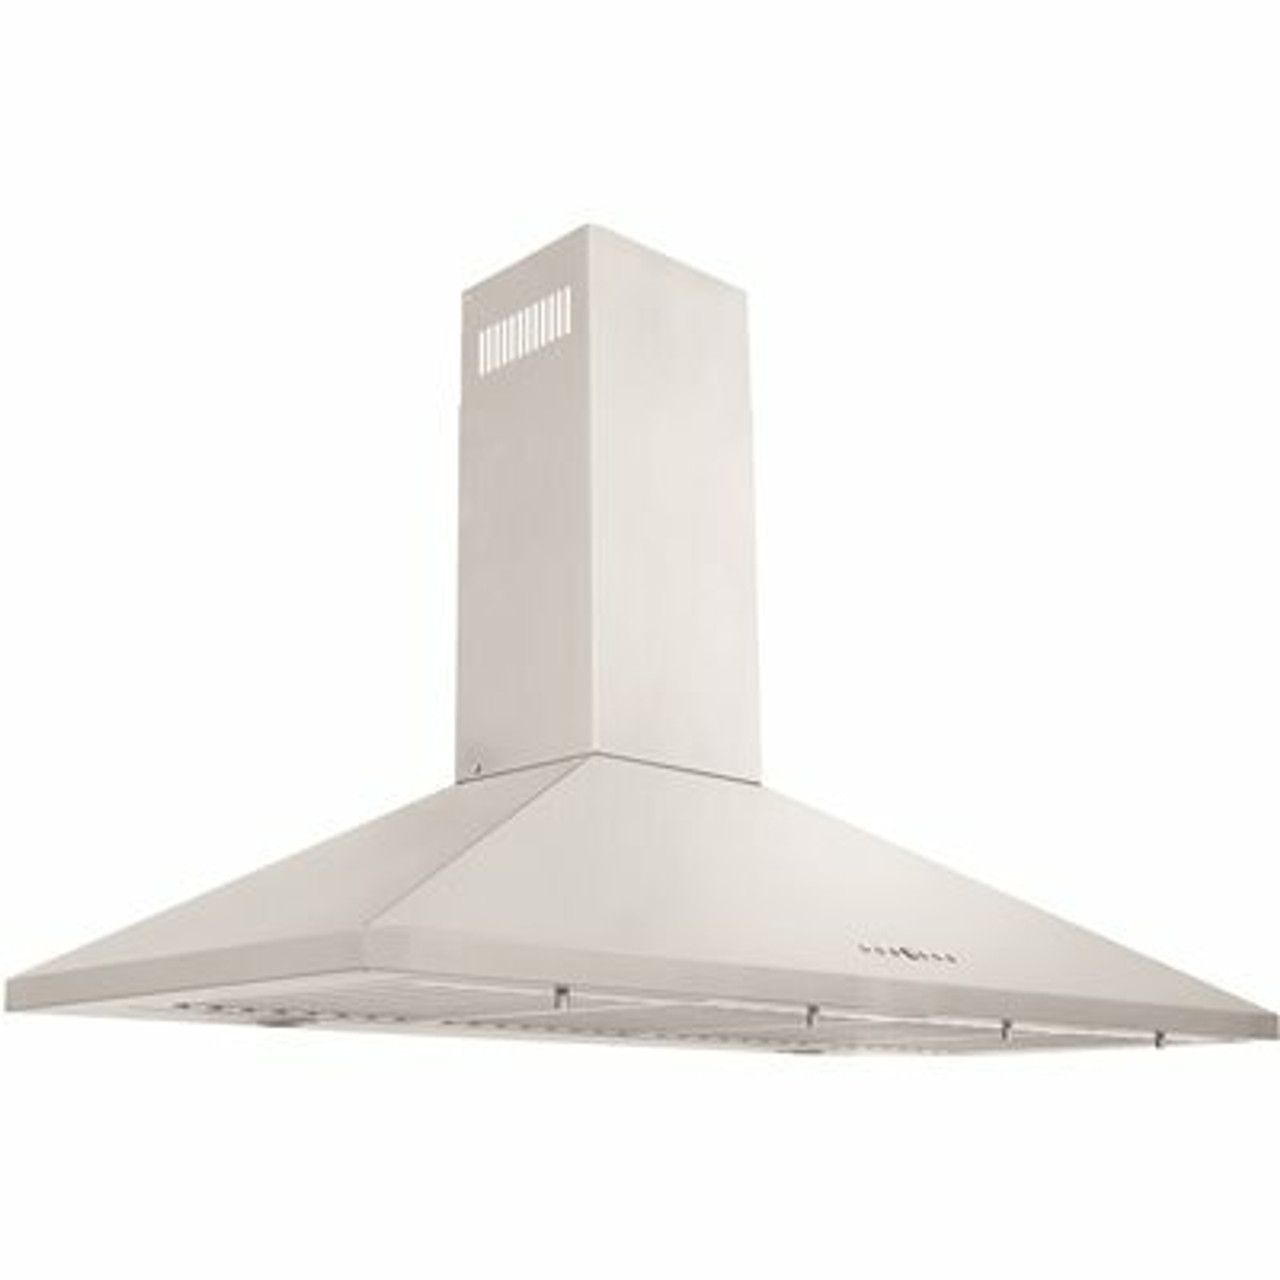 Zline Kitchen And Bath 48 In. Convertible Vent Wall Mount Range Hood In Stainless Steel (Kl2-48)